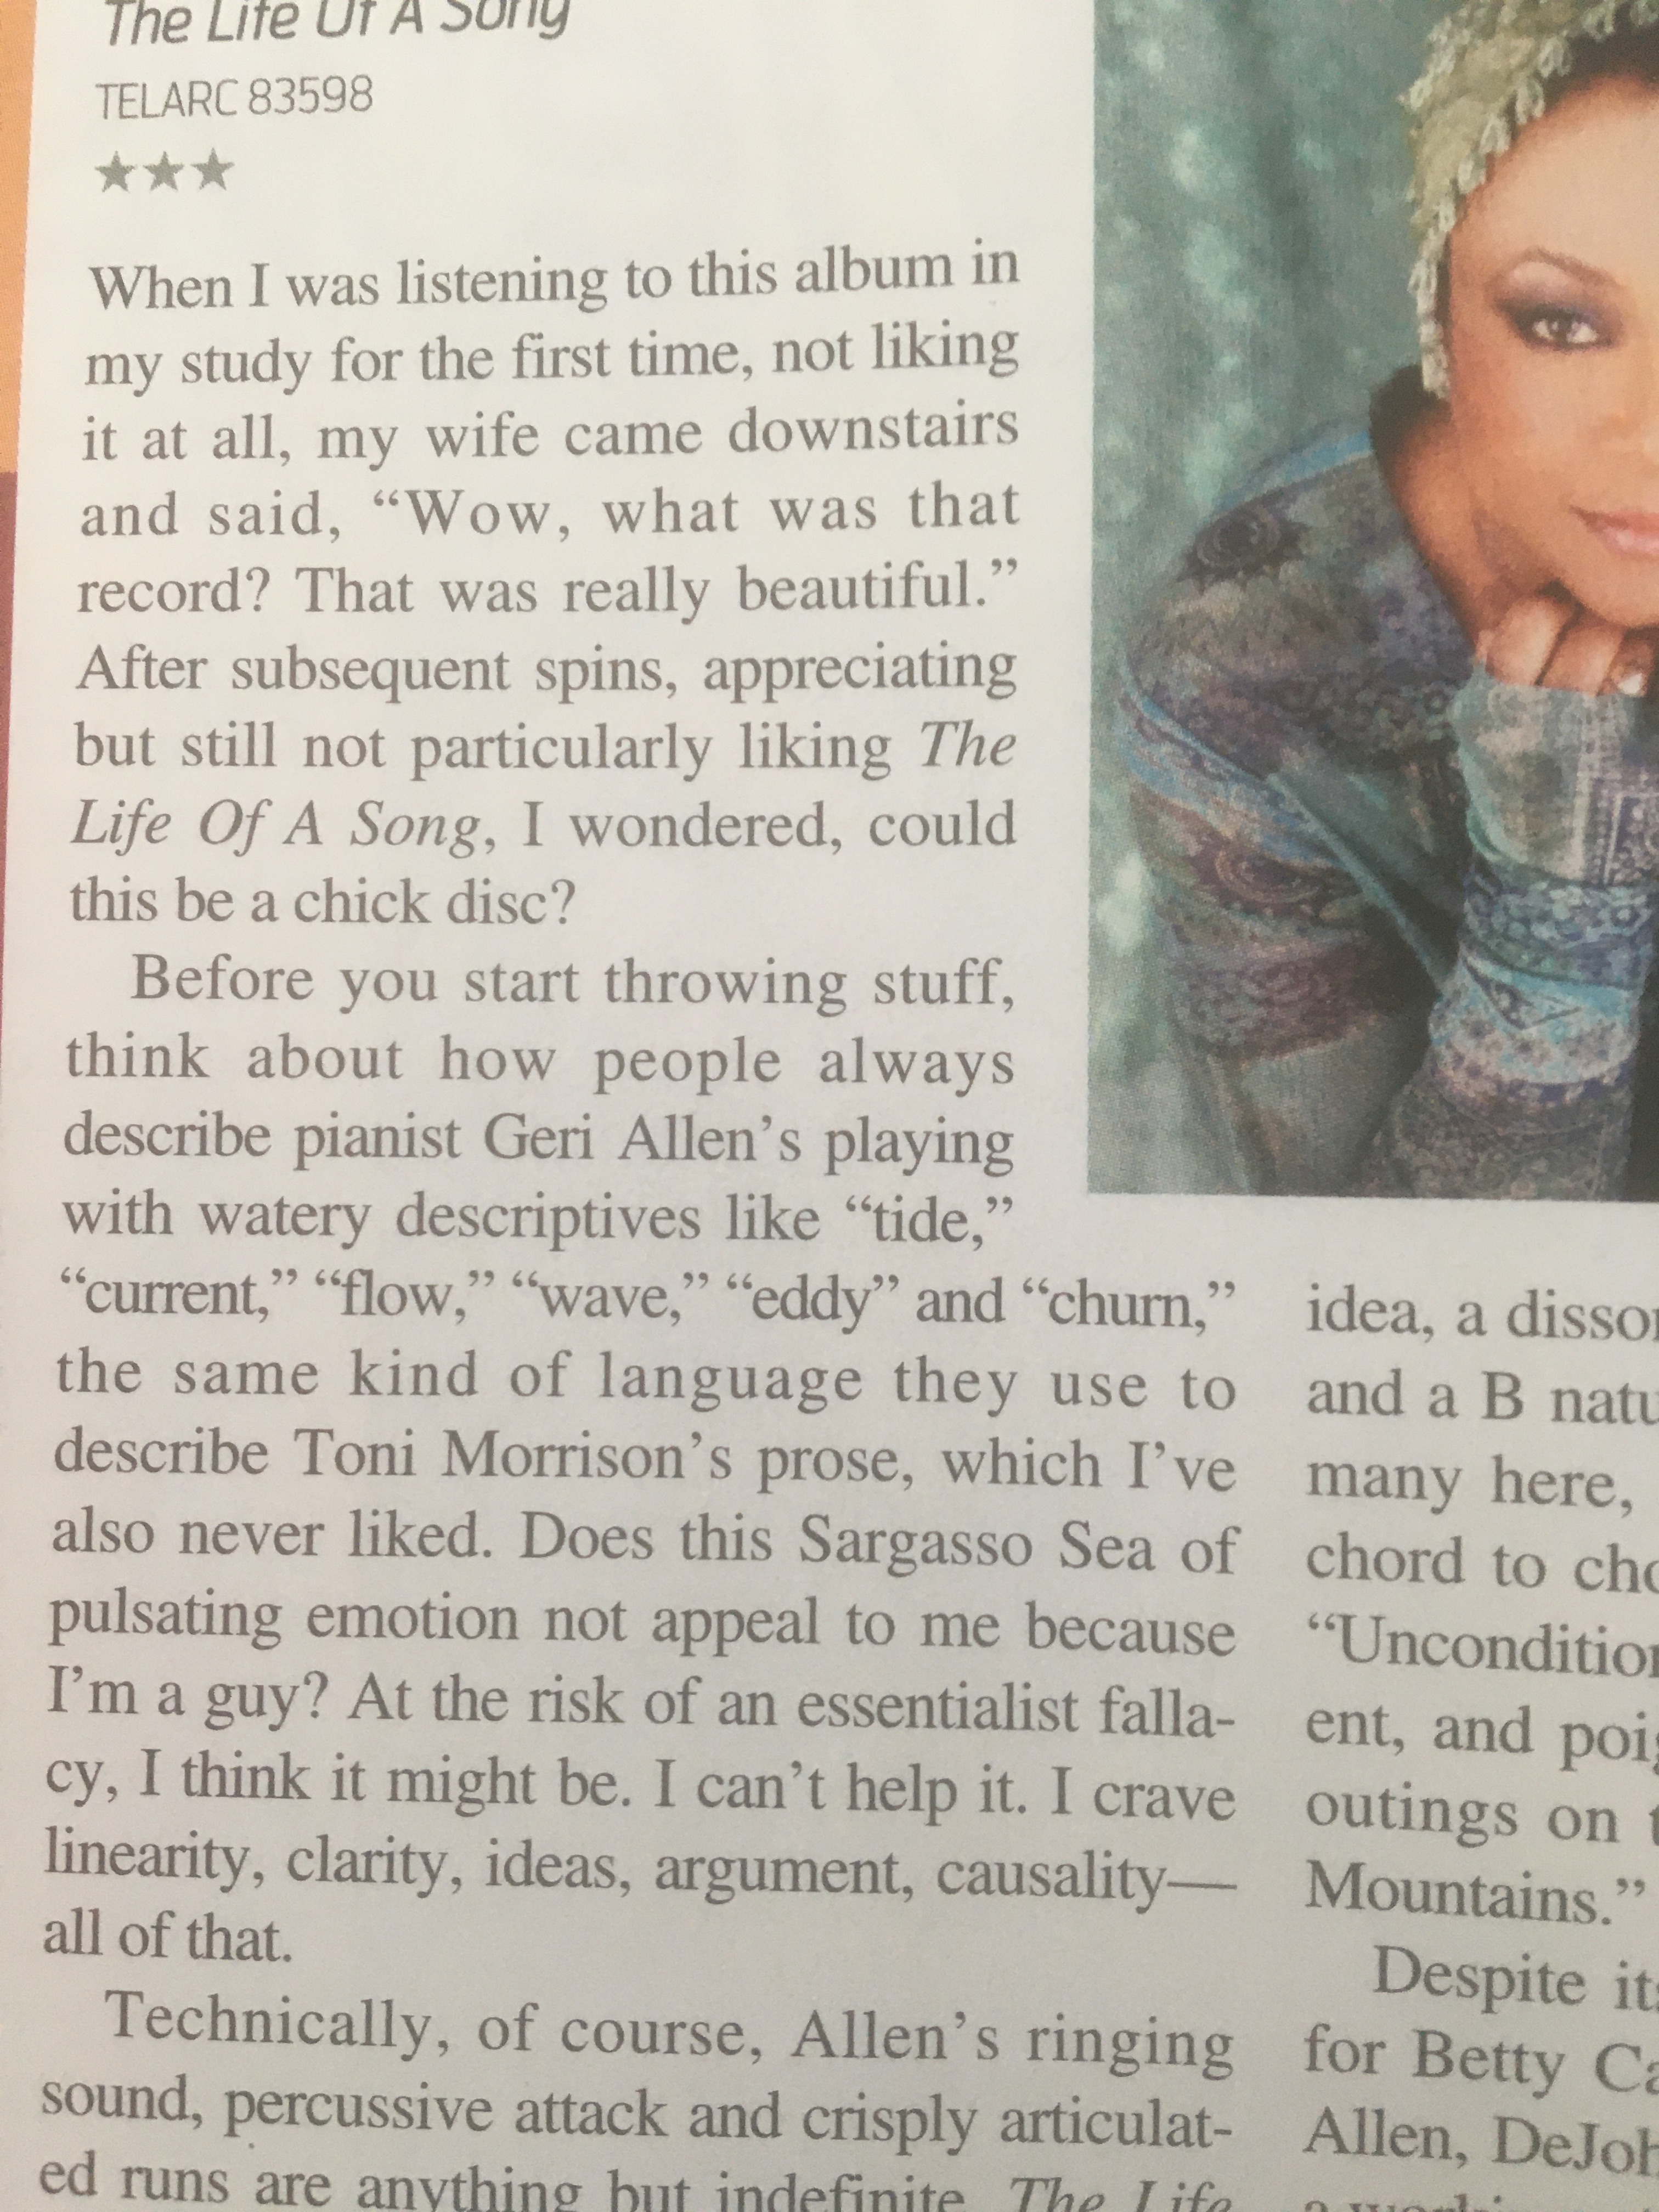 A sexist review of The Life Of A Song in Downbeat Magazine.